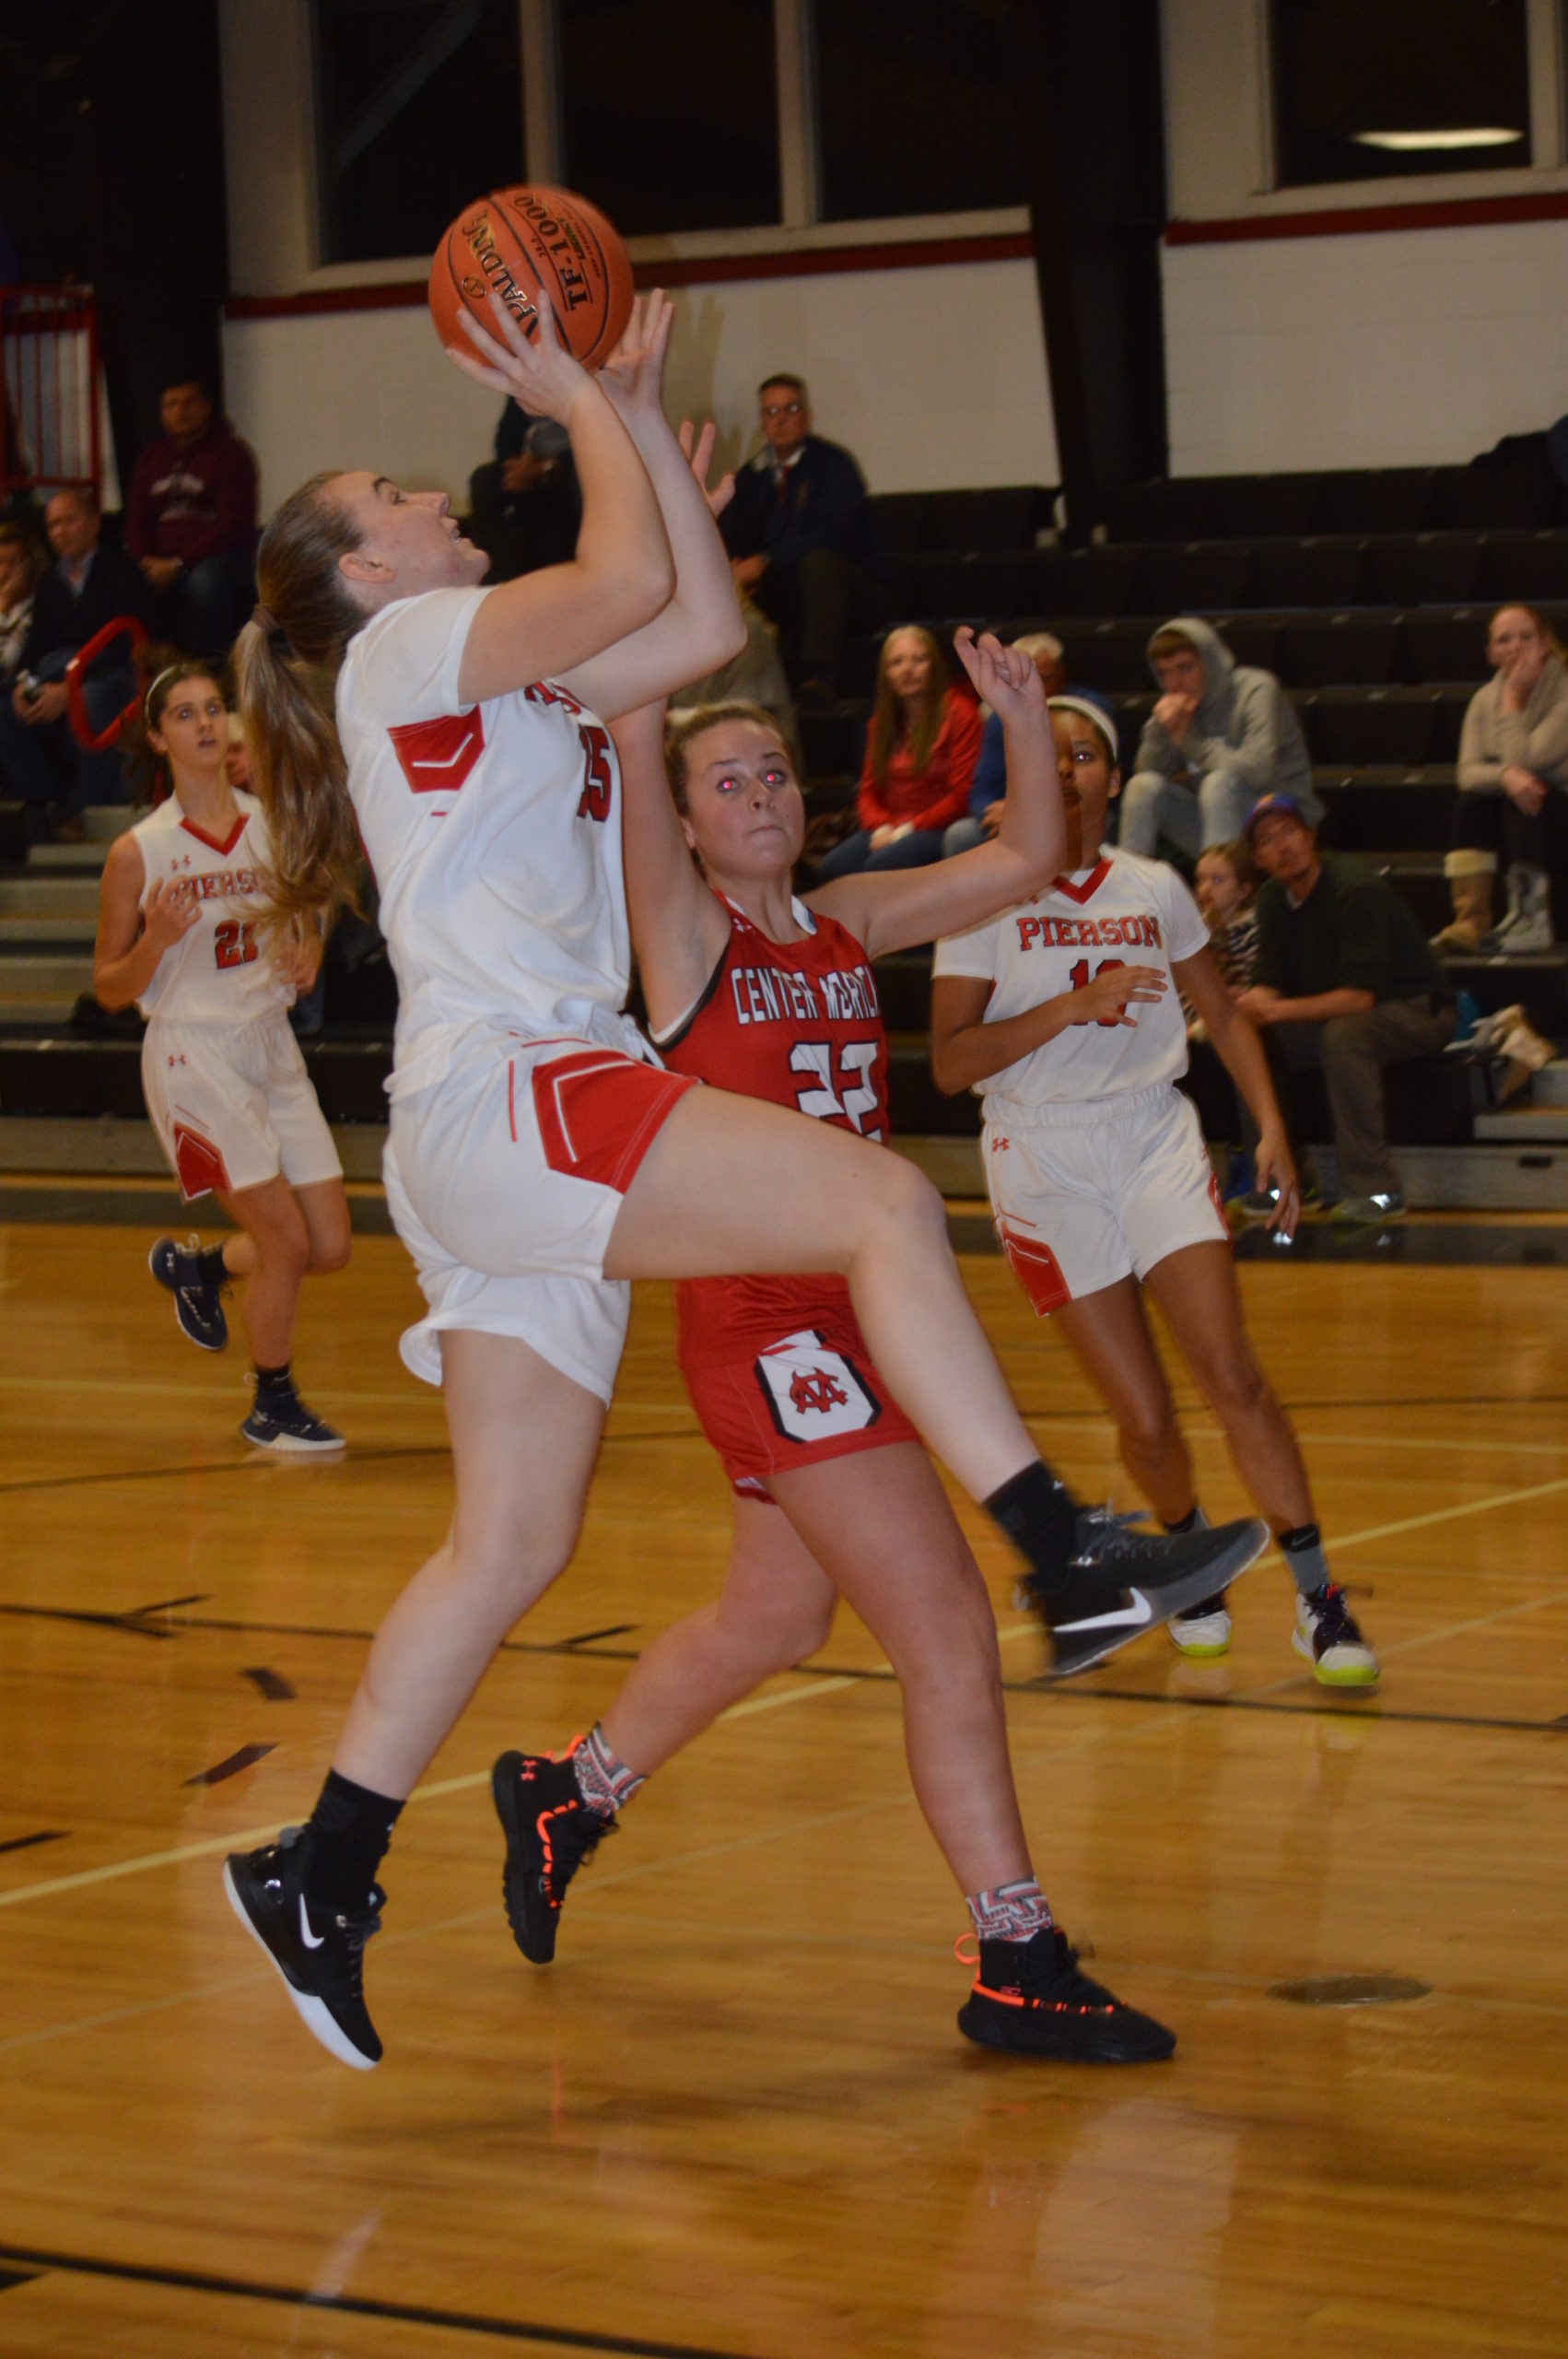 Kathryn Powell shooting against Center Moriches.